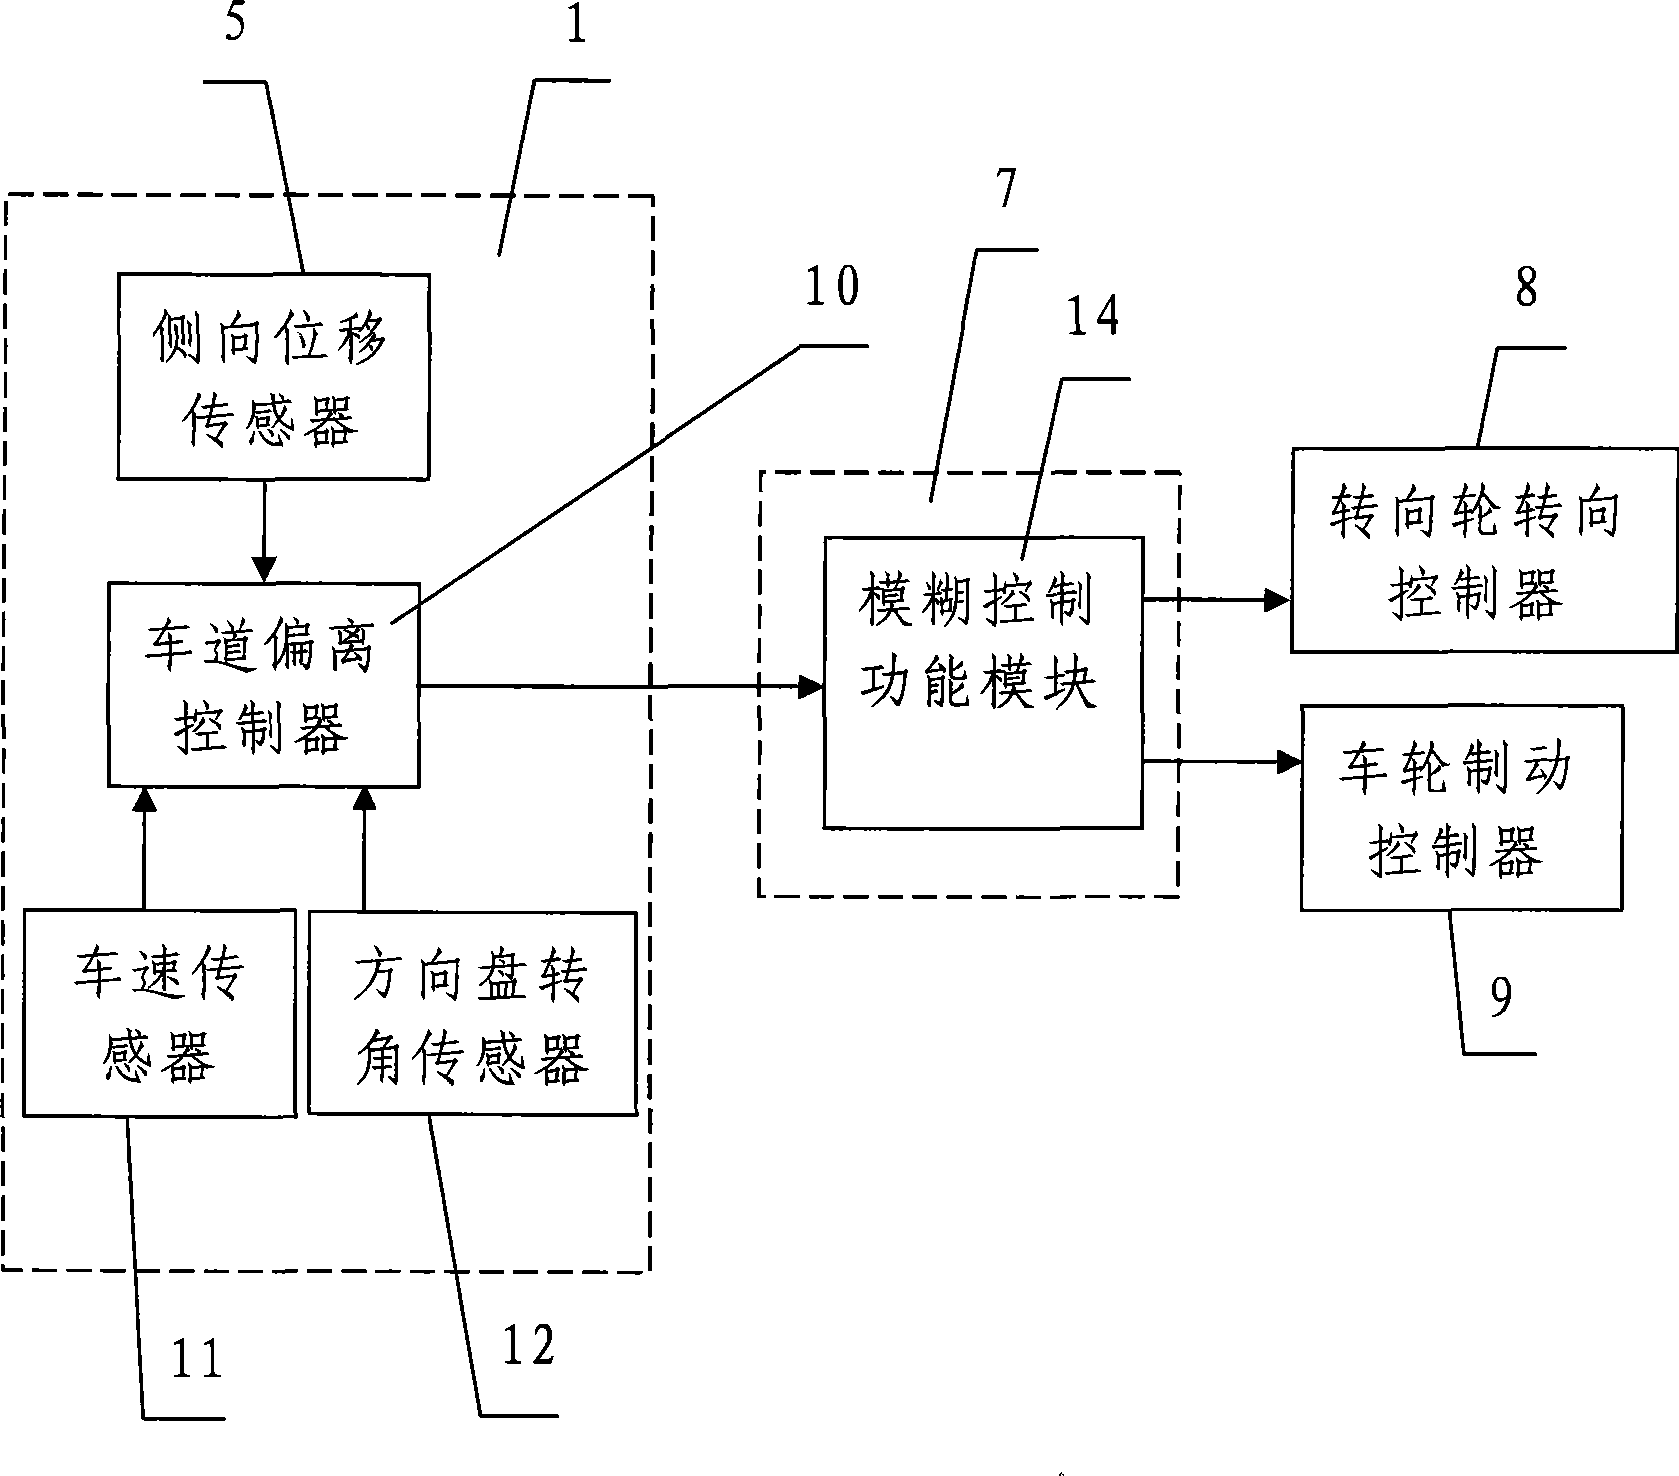 Steering brake stabilization control system of automobile